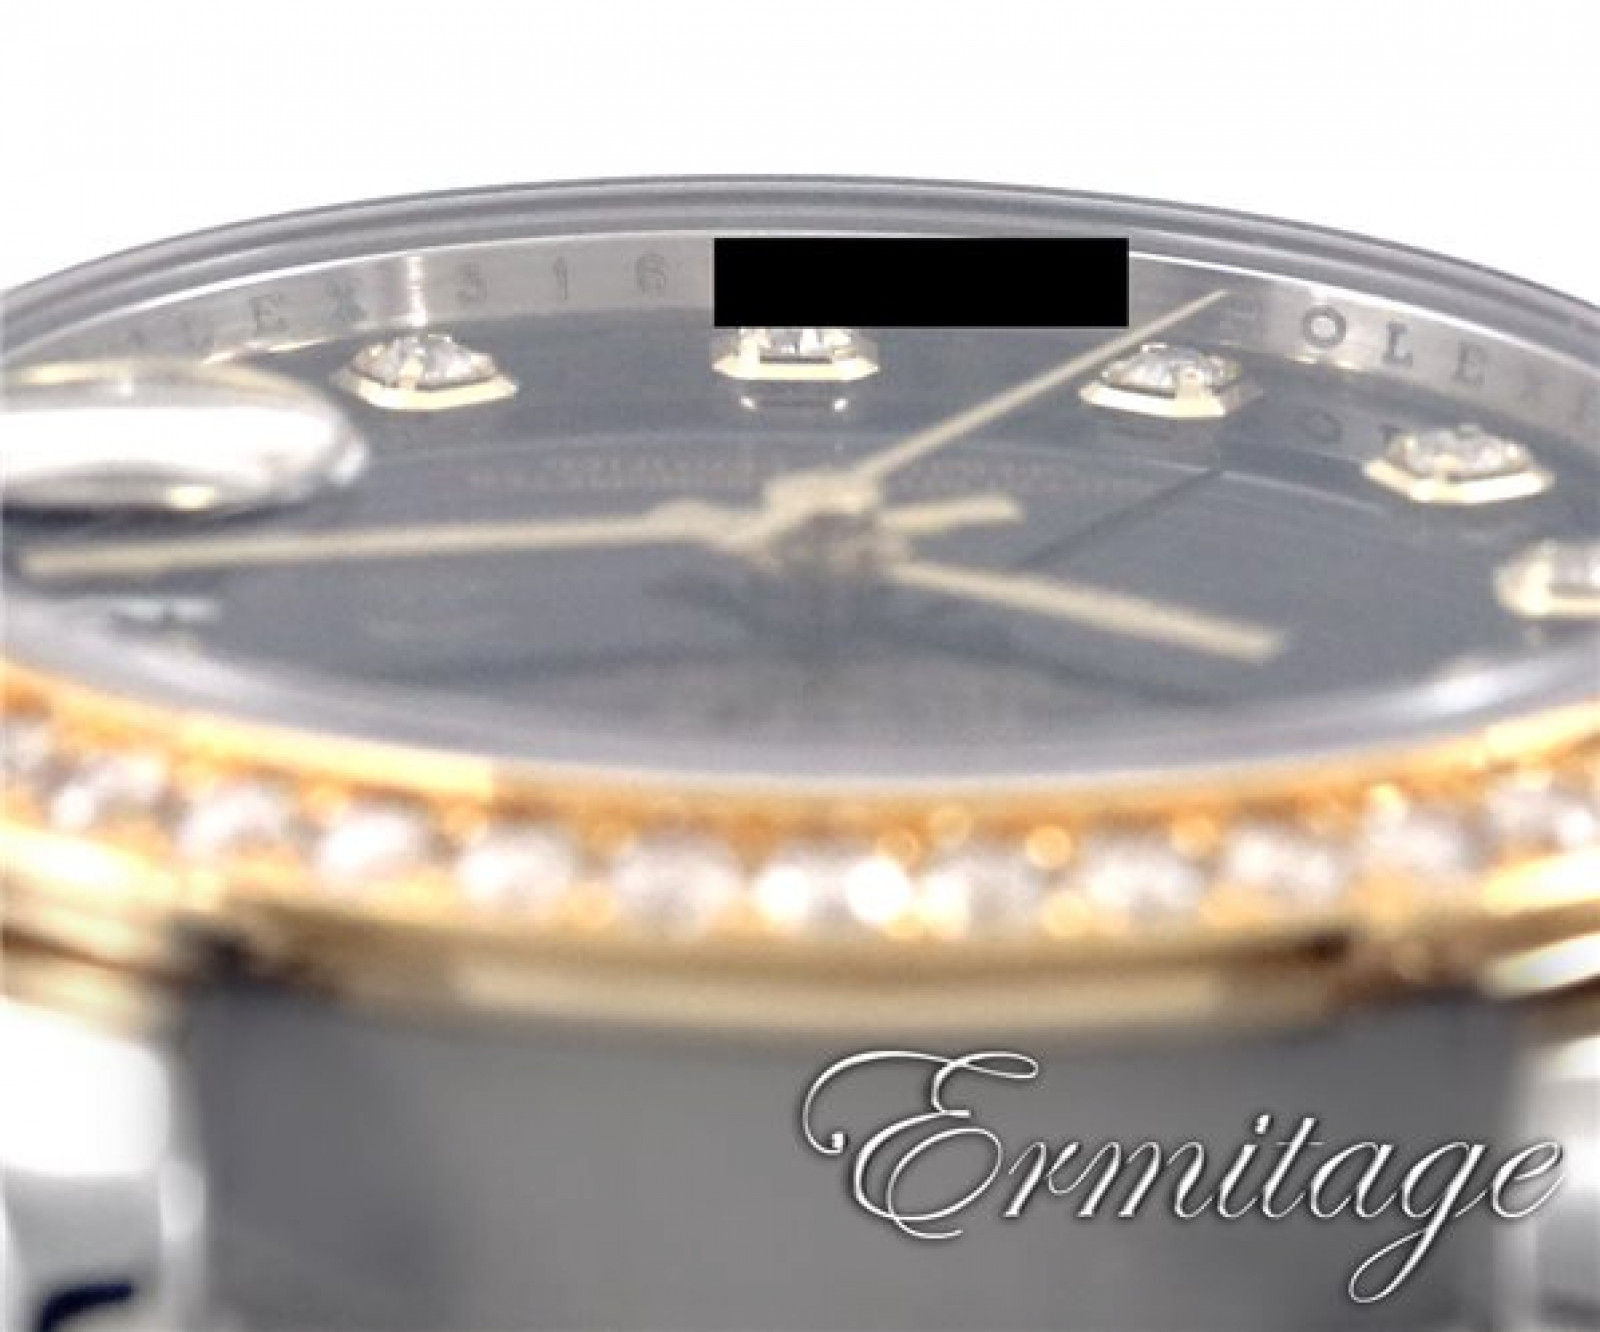 Pre-Owned Rolex Datejust 178383 with Diamonds